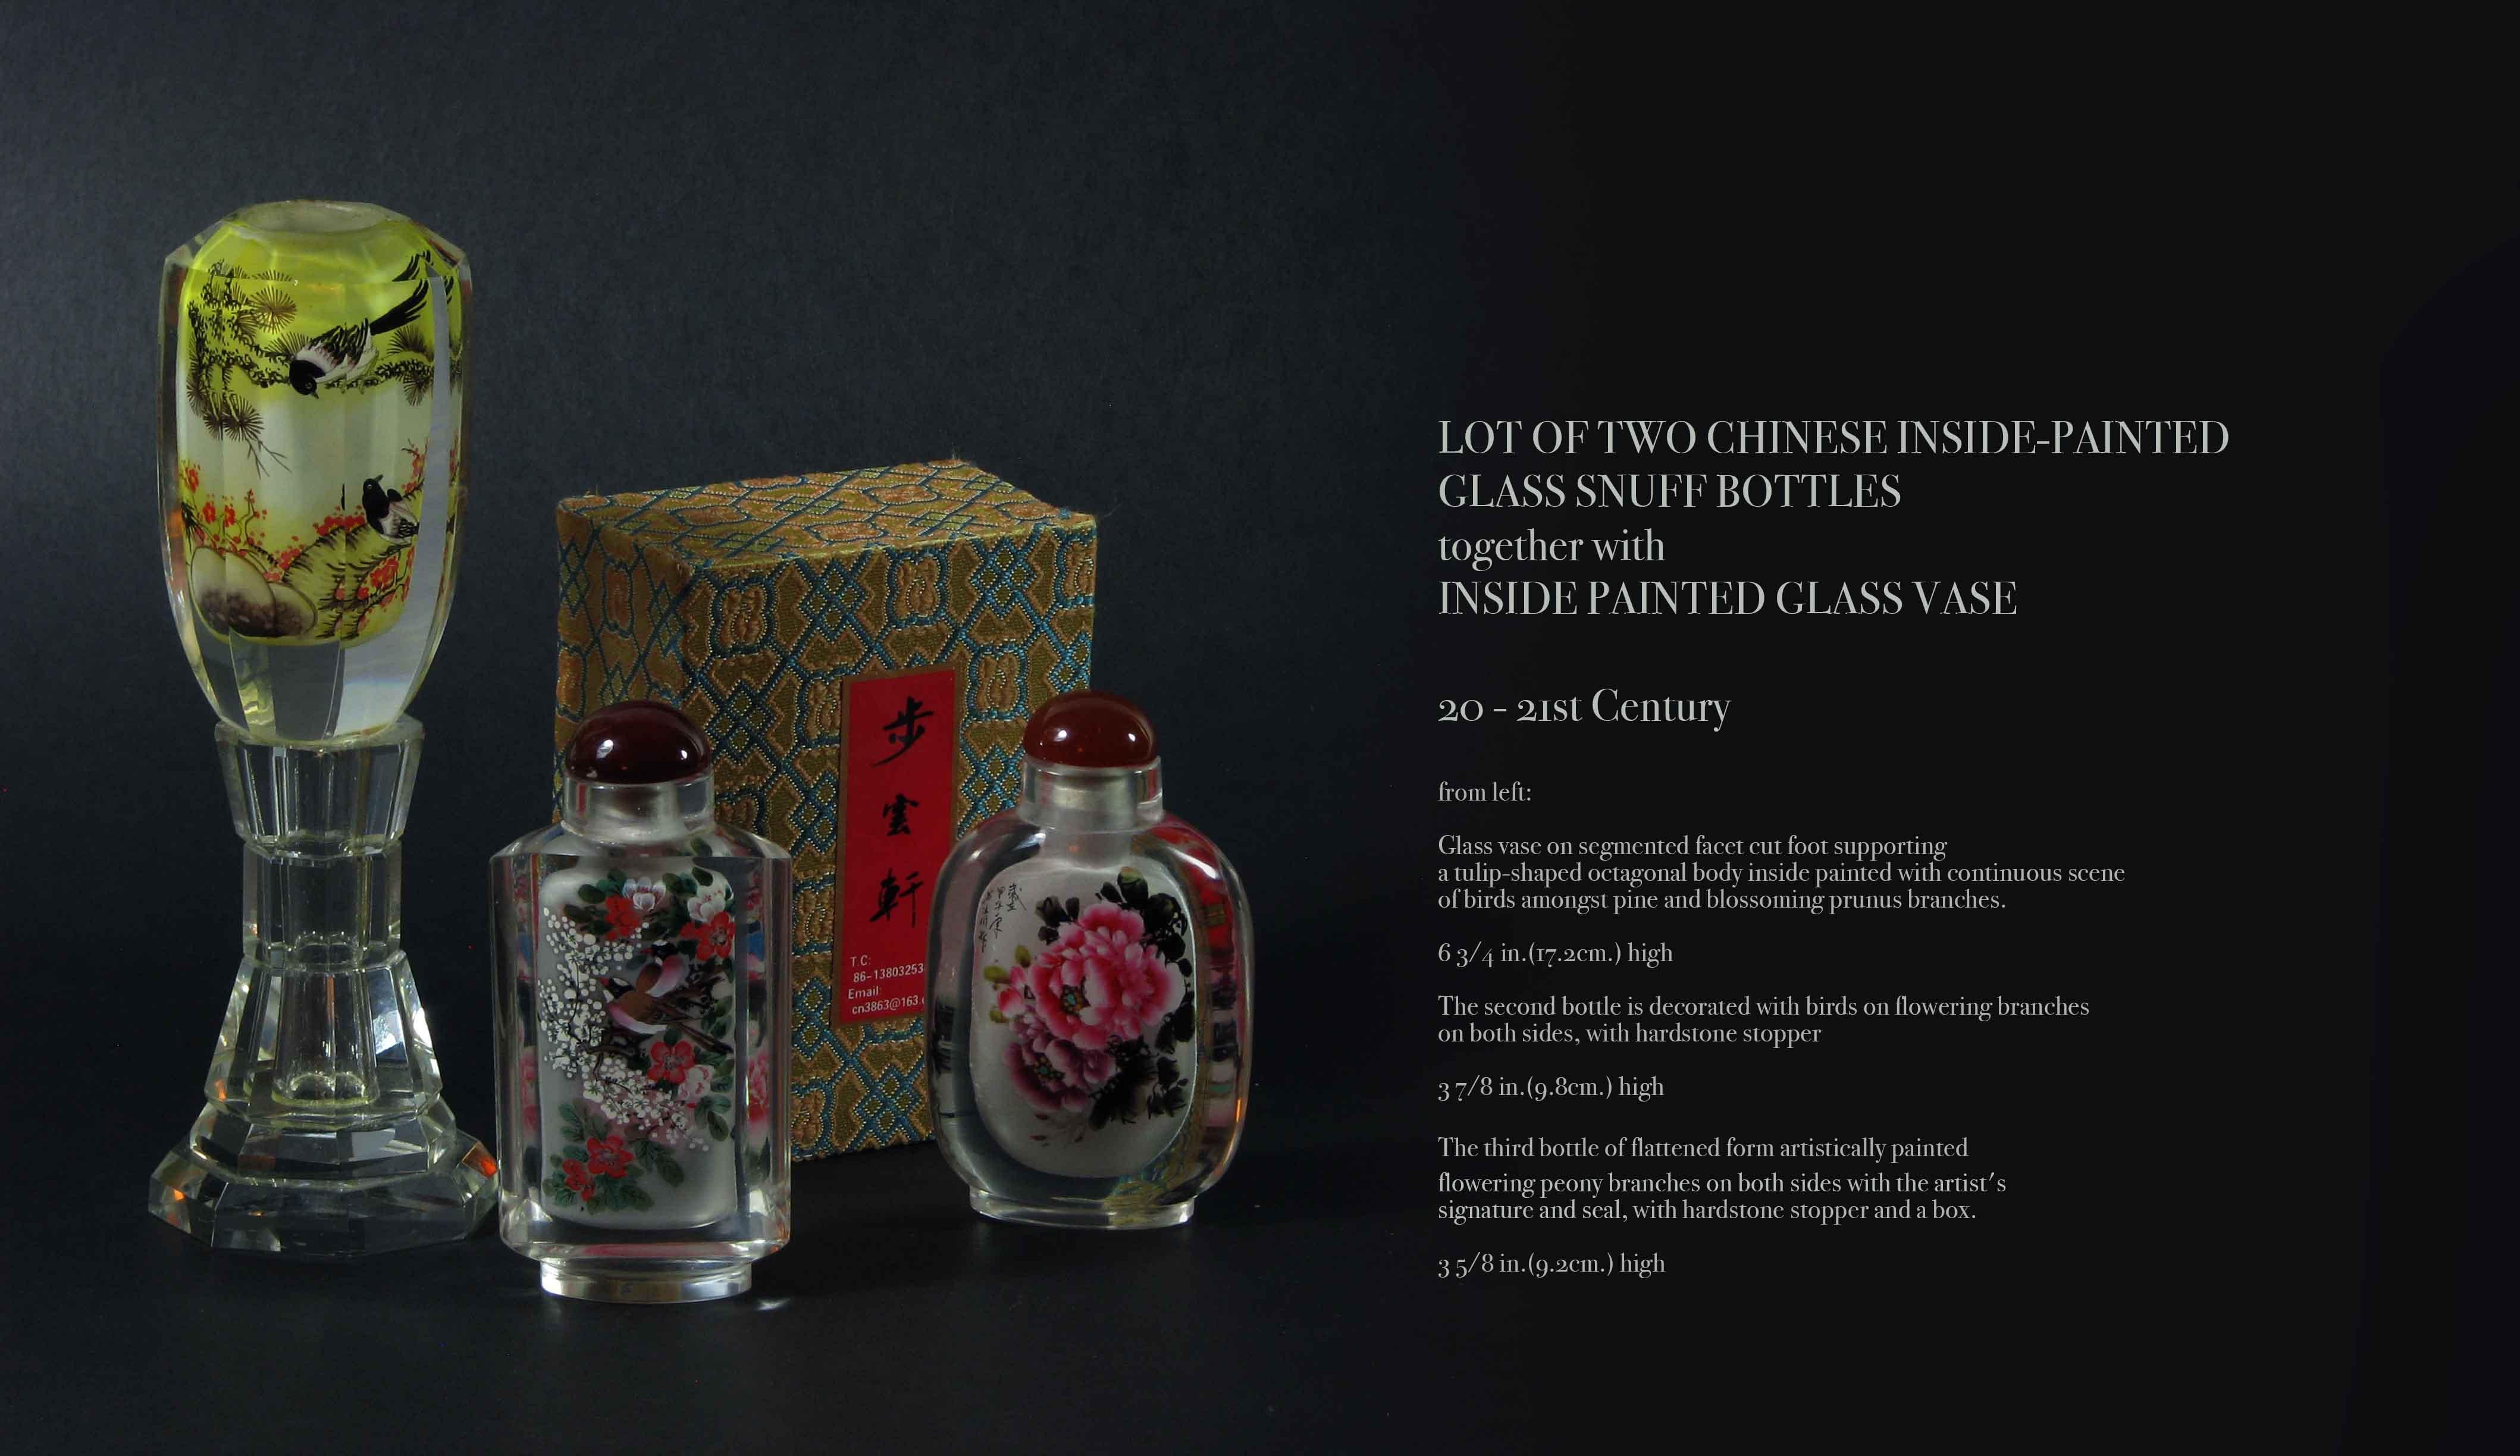 Lot of two Chinese inside-painted
Glass snuff bottles
Together with
Inside painted glass vase

20 - 21st Century.

From left:

Glass vase on segmented facet cut foot supporting
a tulip-shaped octagonal body inside painted with continuous